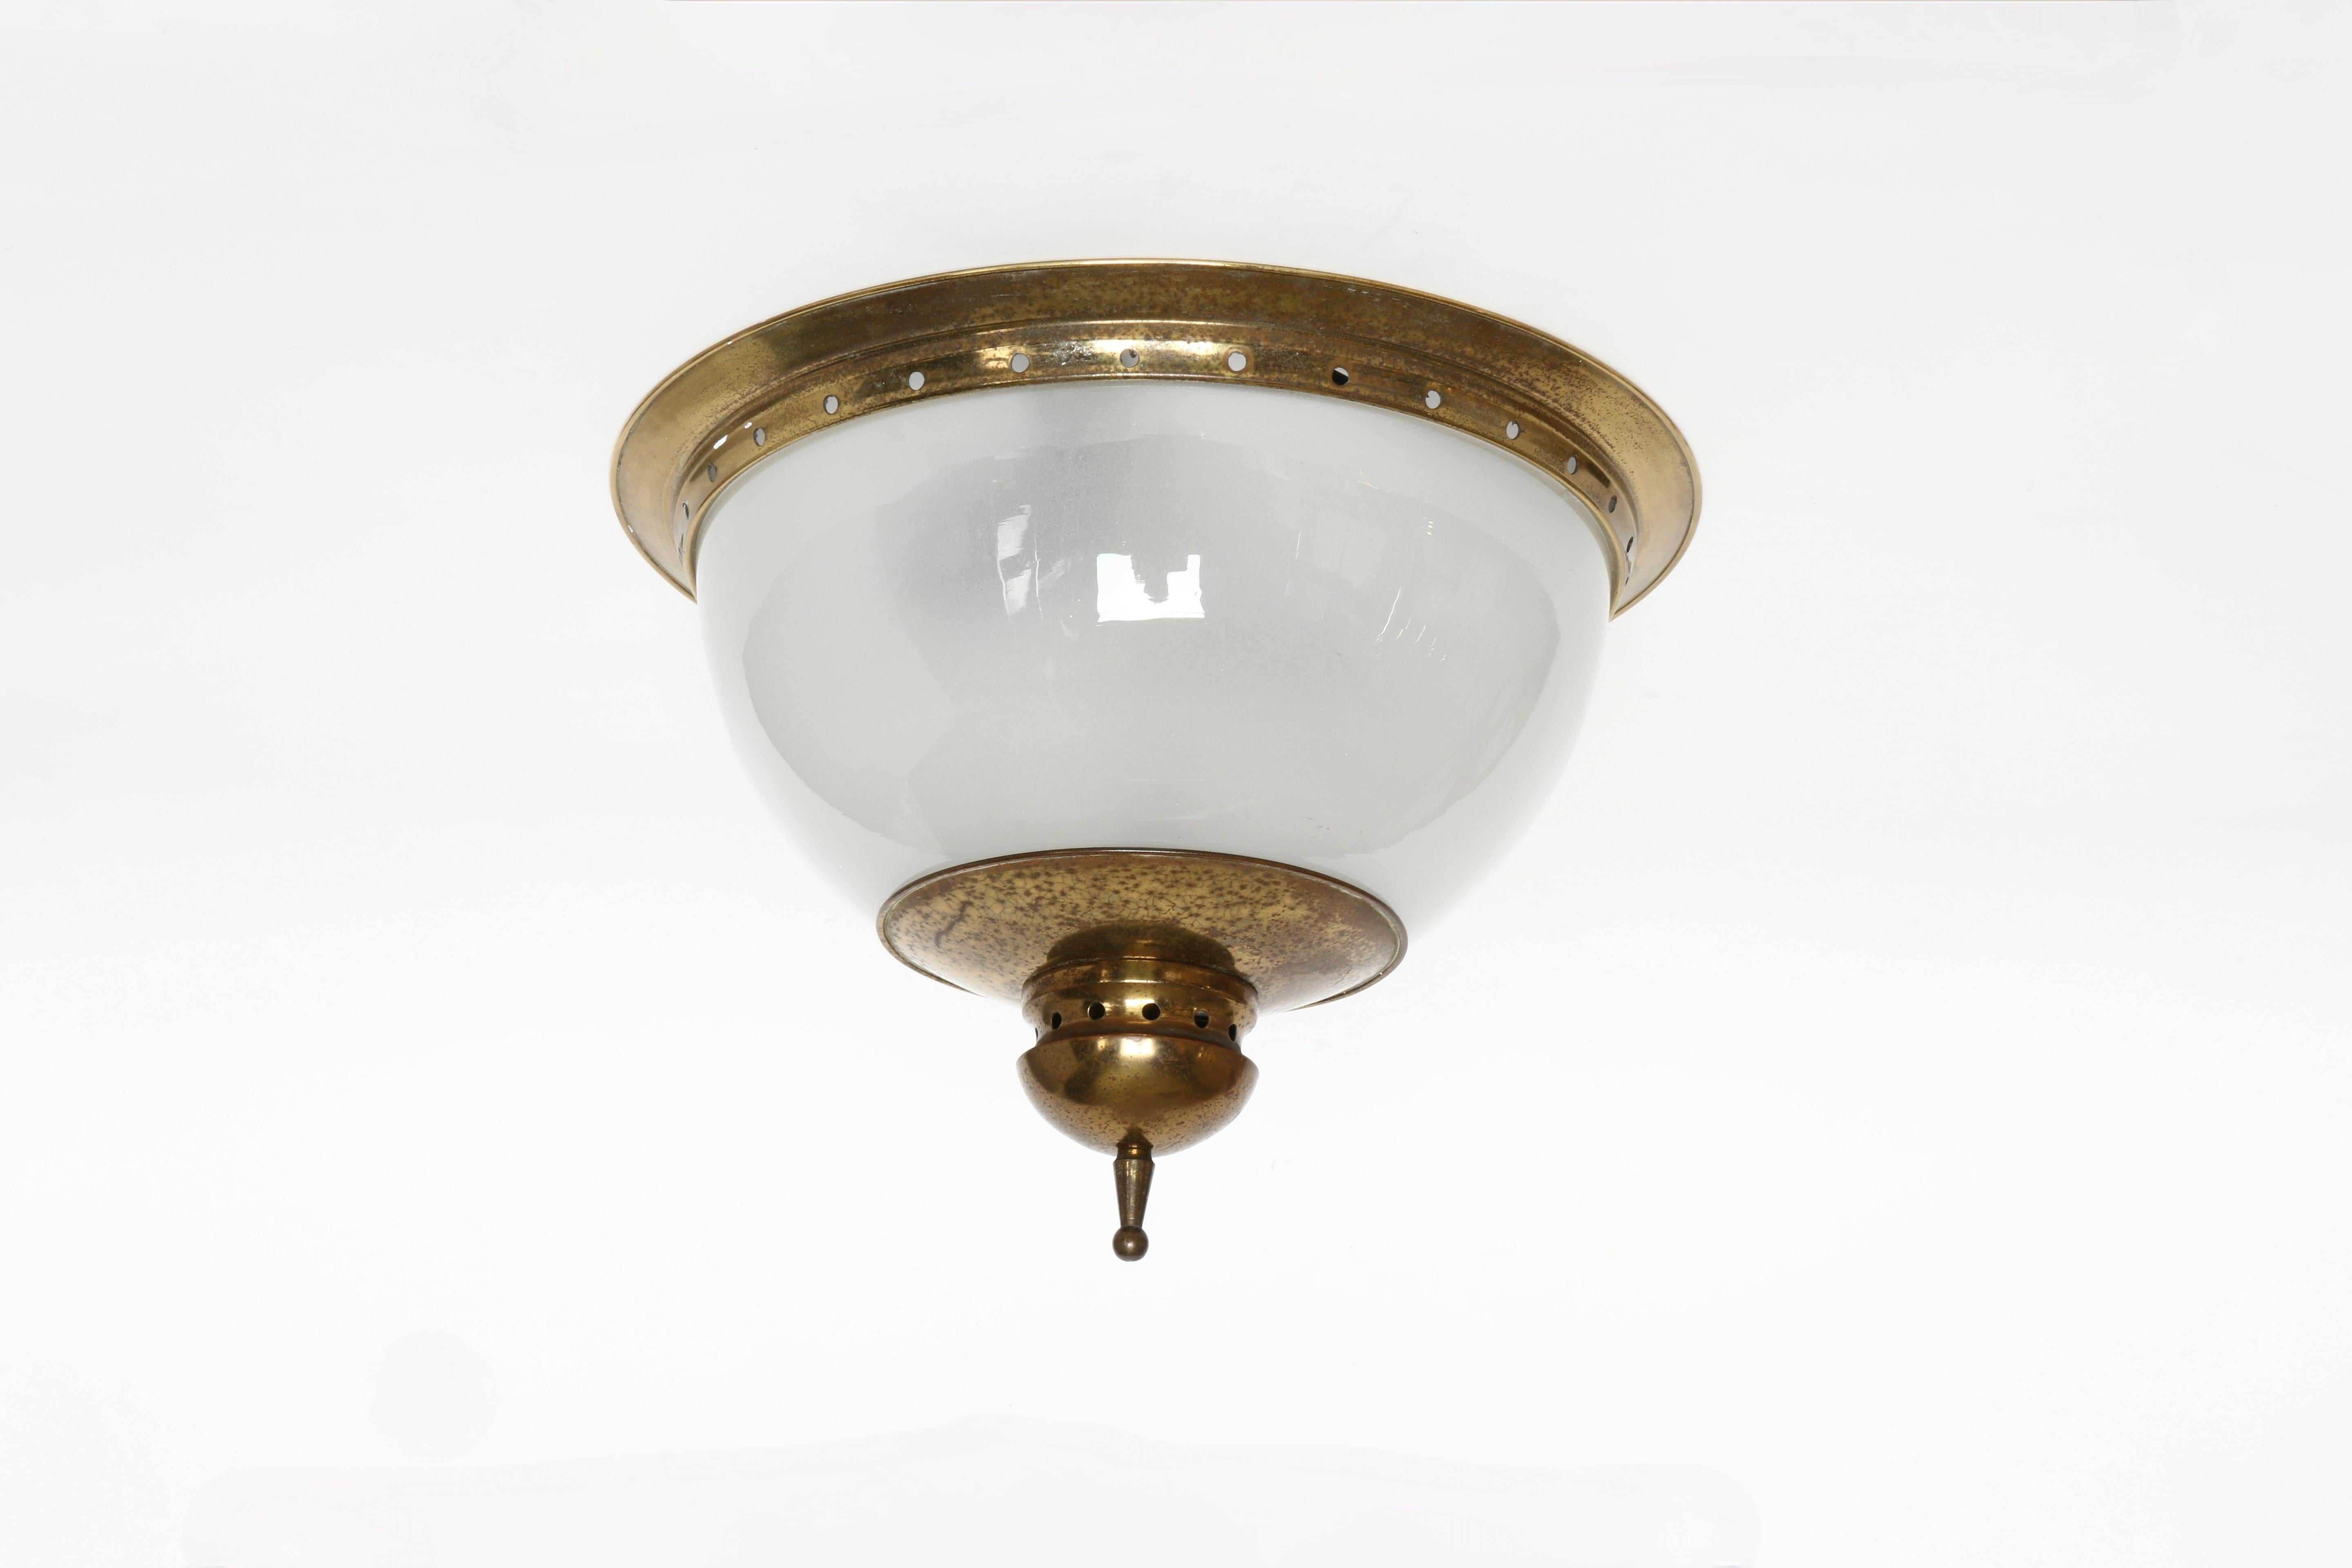 Luigi Caccia Dominioni for Azucena wall or ceiling light
Made in Italy, 1960s
Opalescent glass, brass
Takes 2 Edison base bulbs
Complimentary US rewiring upon request
Price is for 1 light
3 lights are available.

At Illustris Lighting our main focus